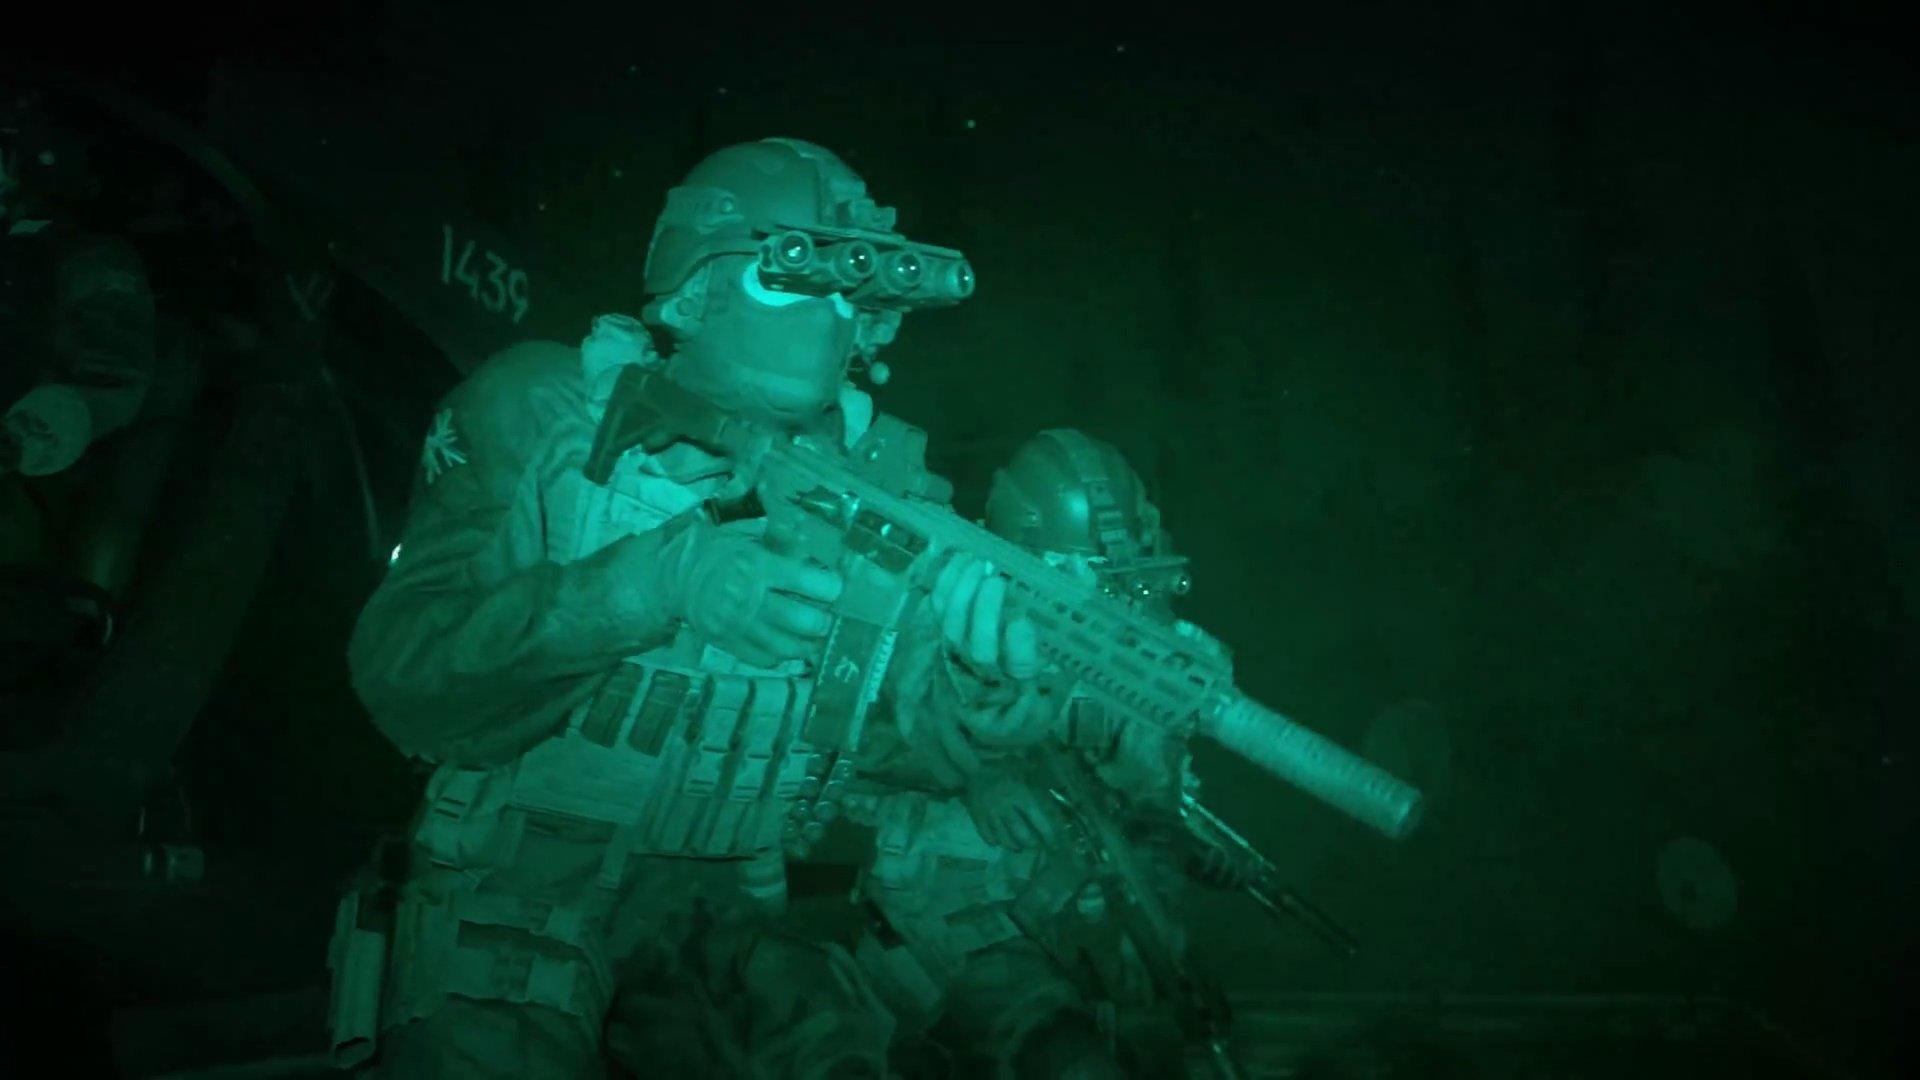 2530 Night Vision Military Images Stock Photos  Vectors  Shutterstock